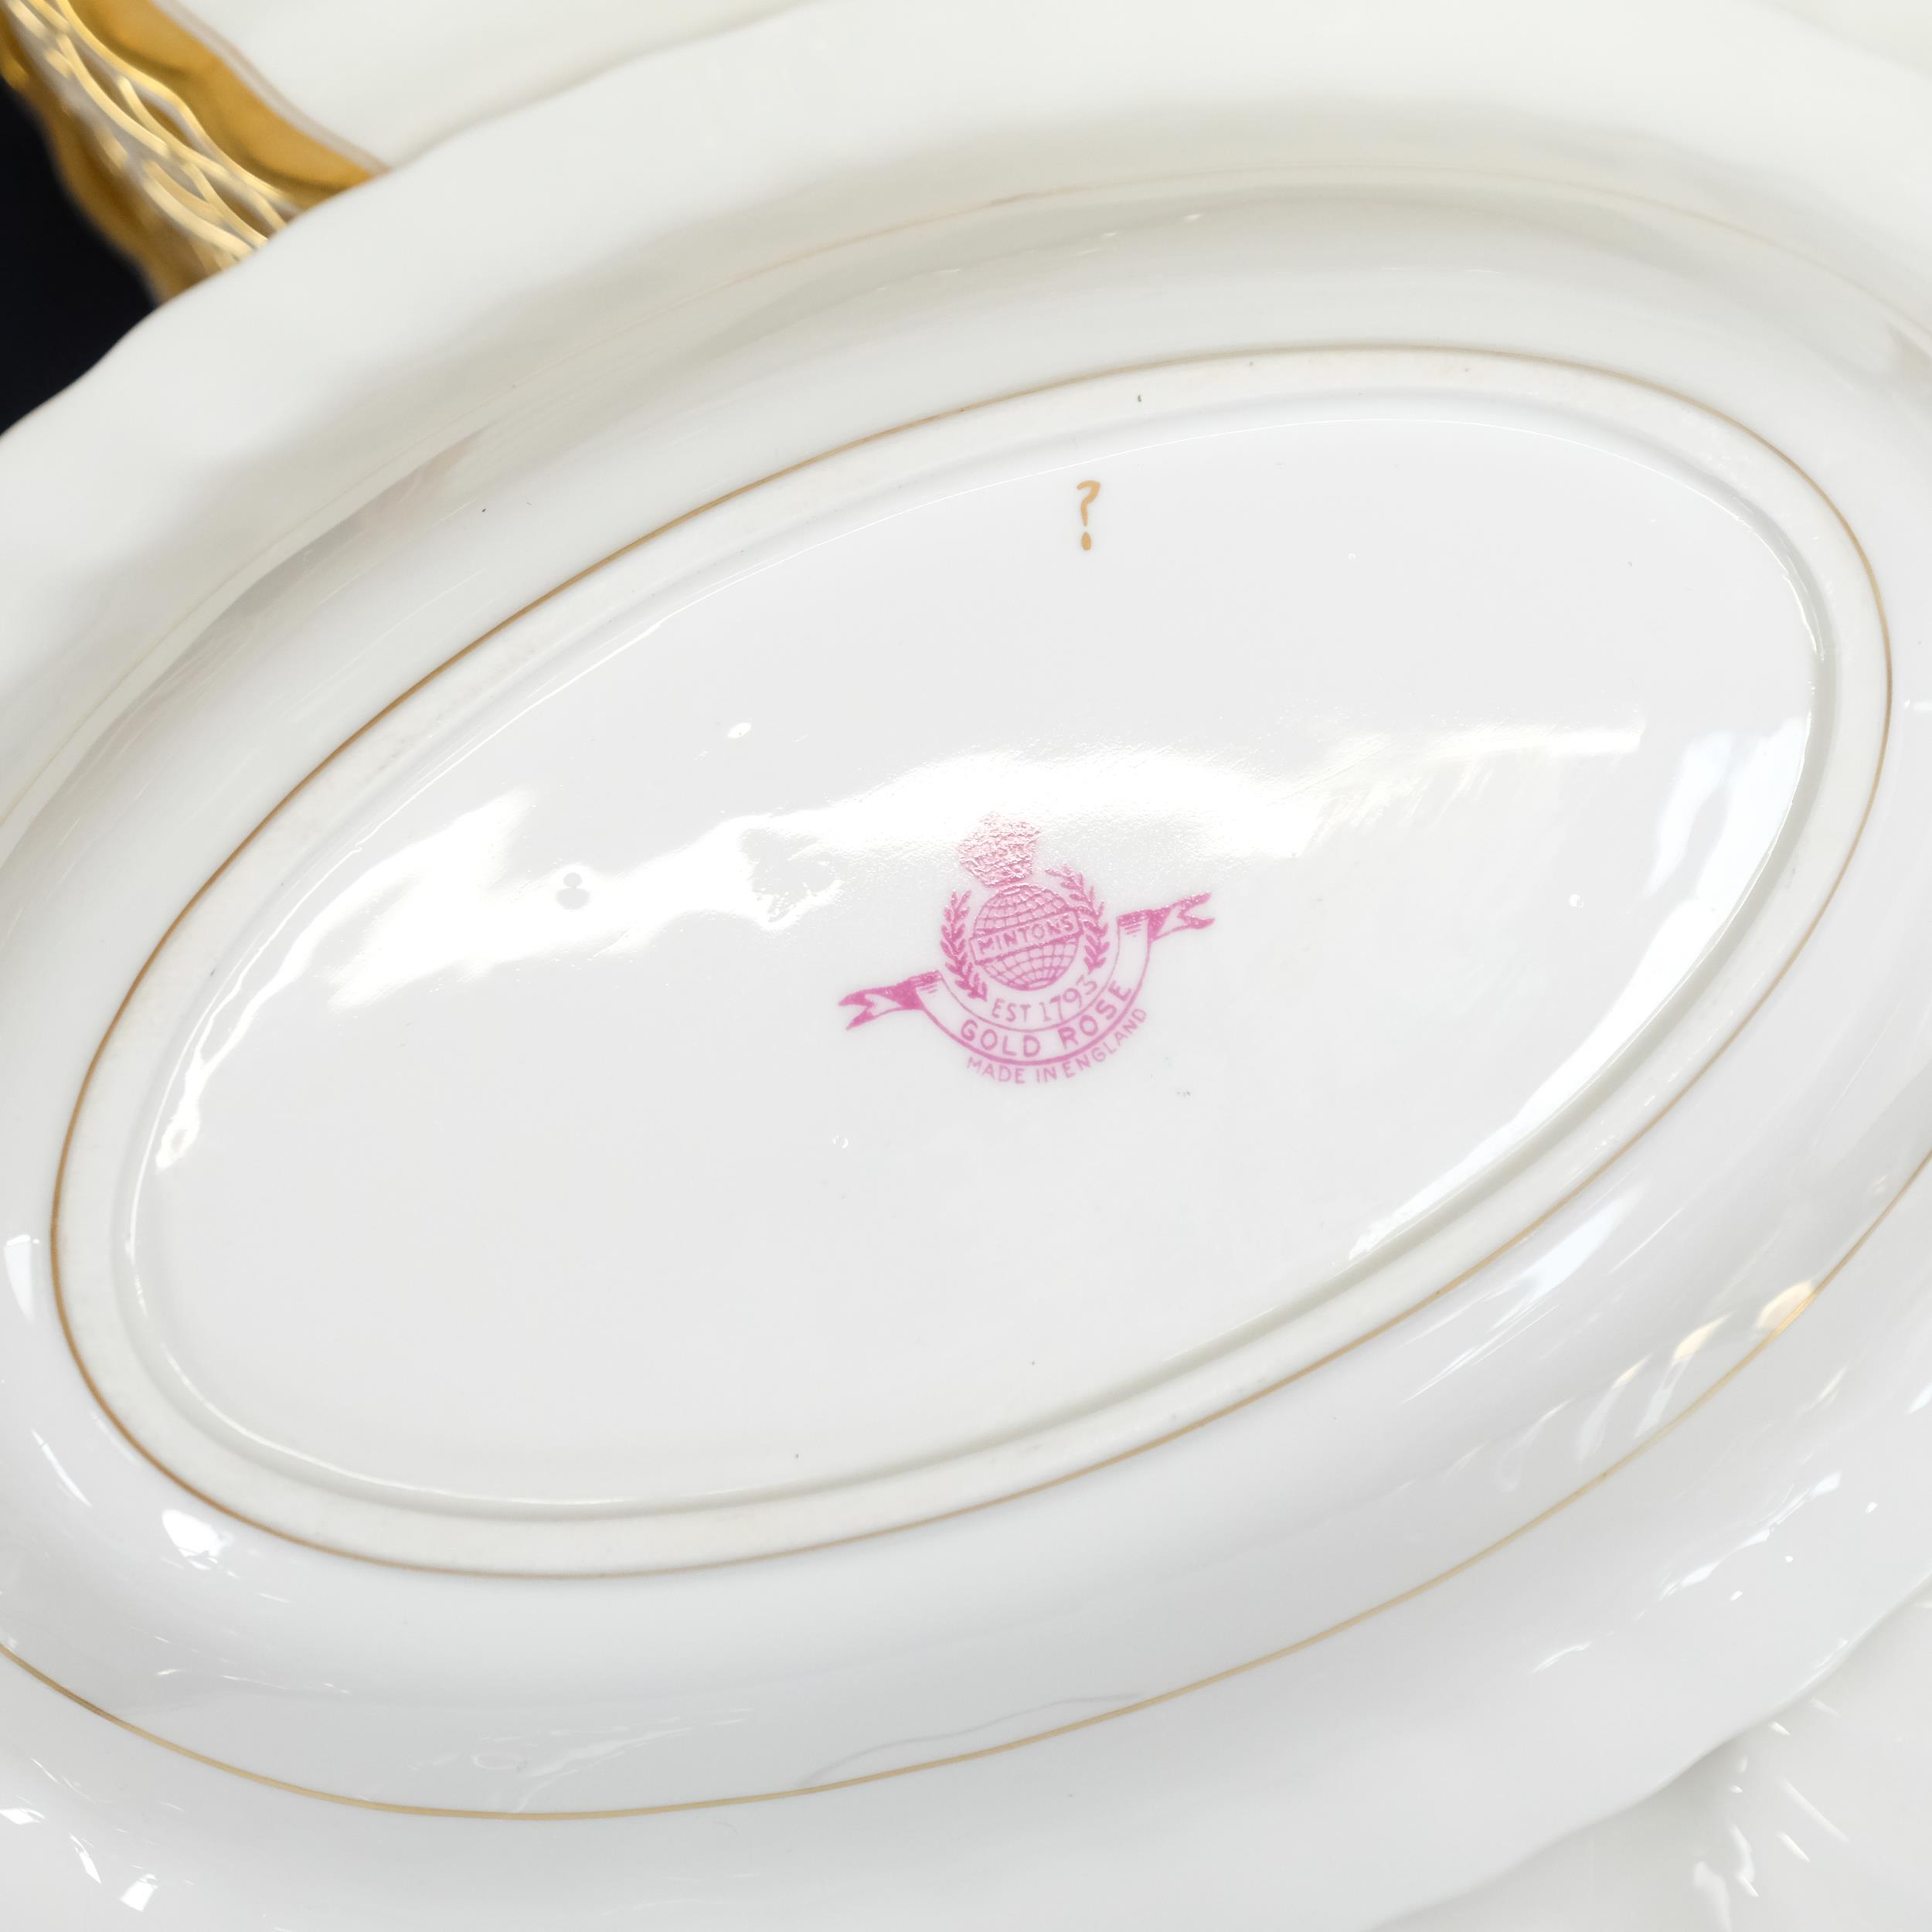 Minton's "Gold Rose" pattern dinner service for 12 people, including vegetable tureen and serving - Image 2 of 2